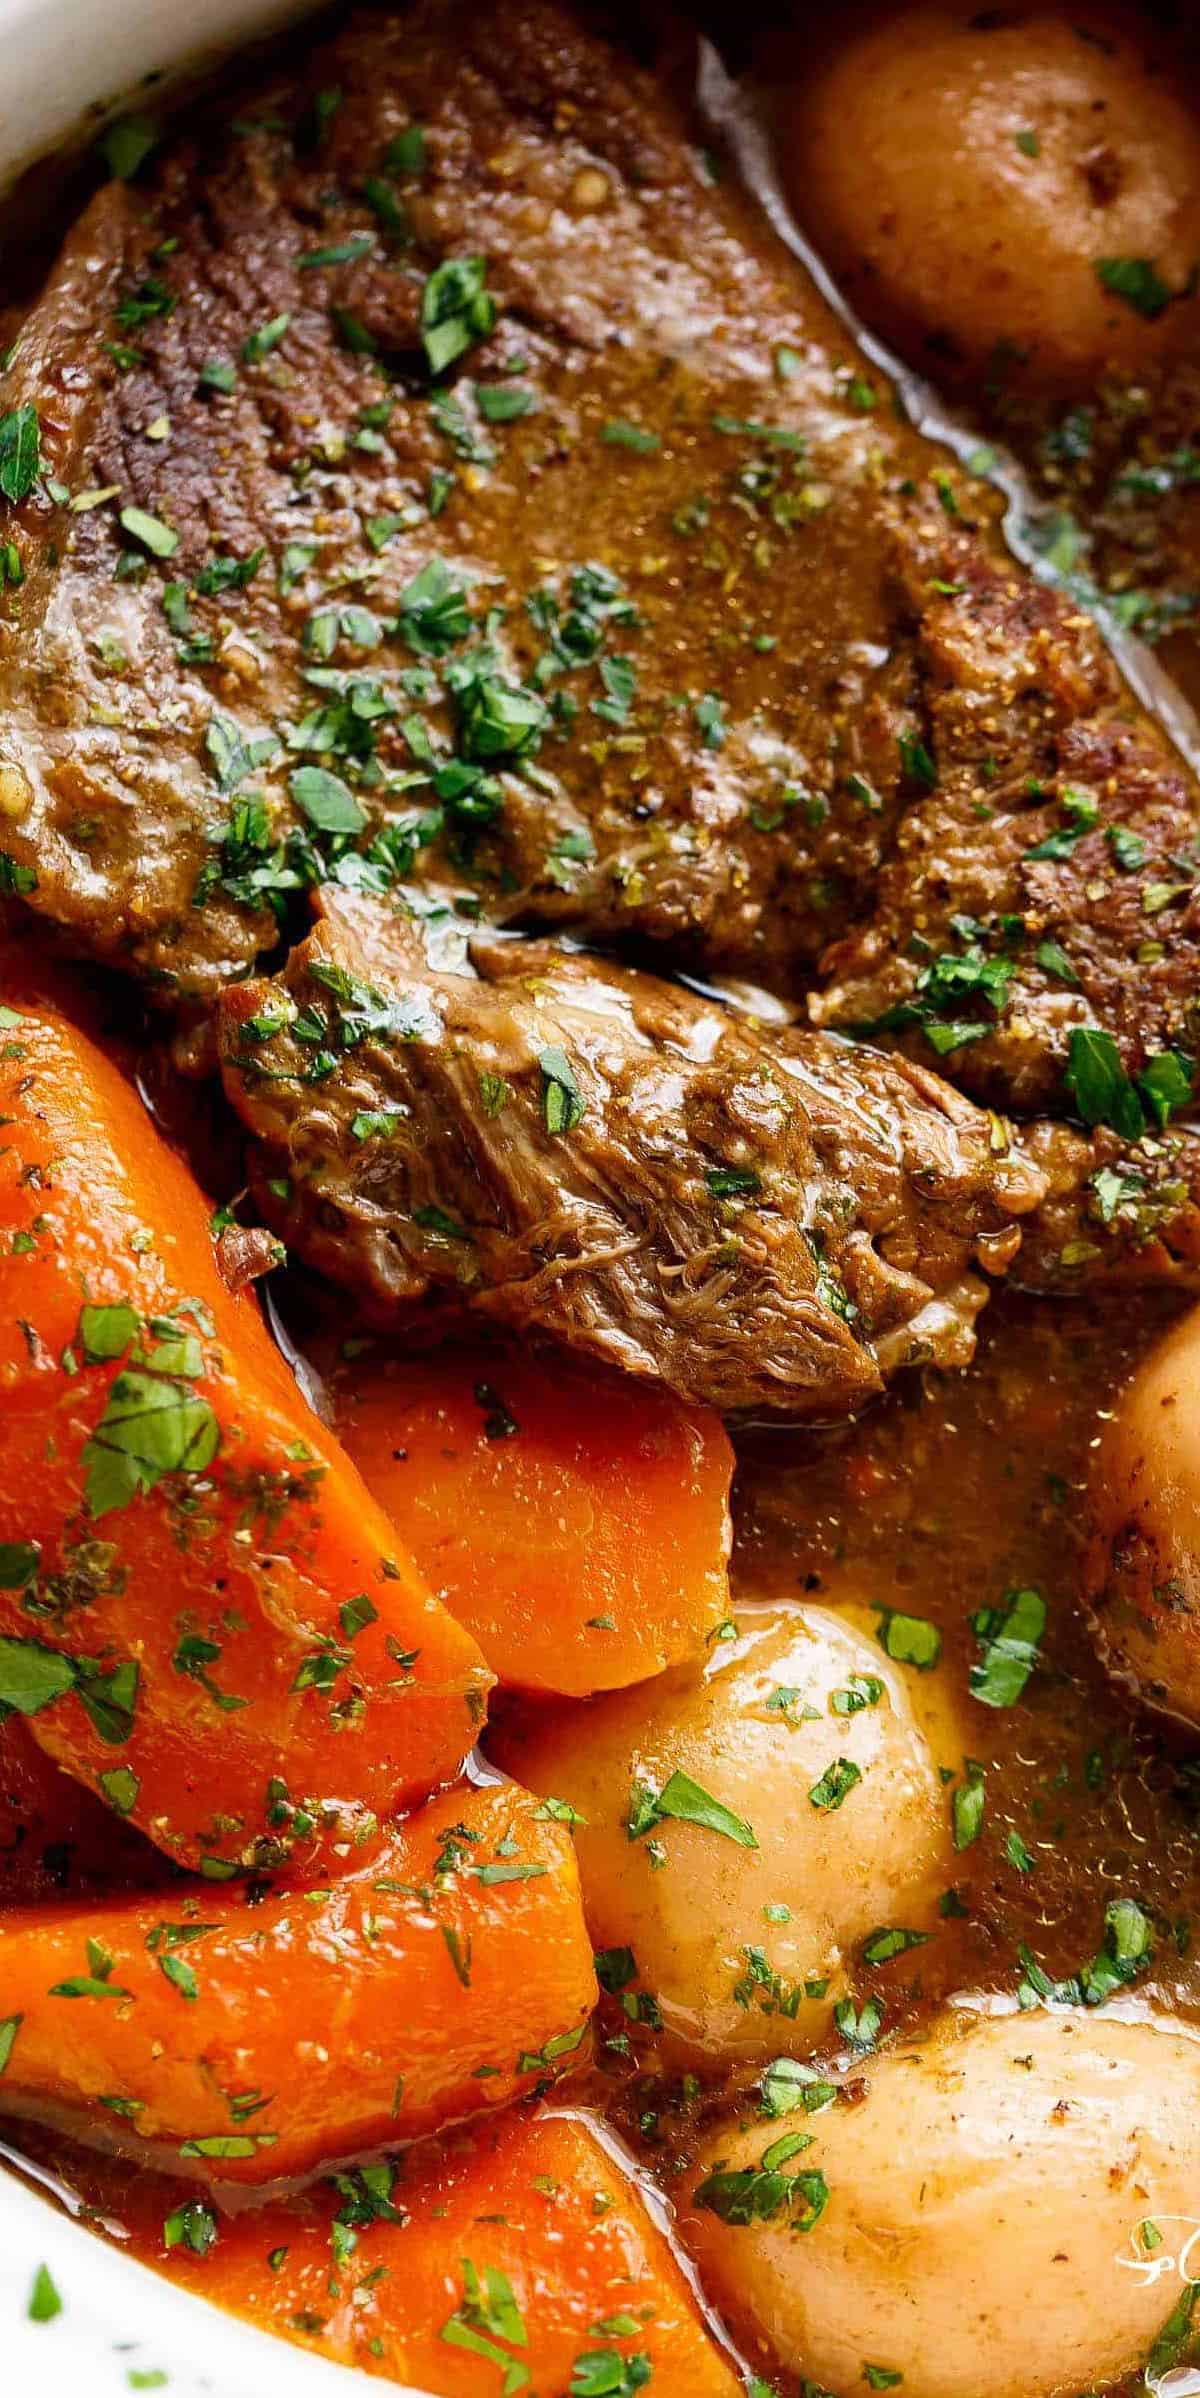  A hearty pot roast that will warm your body and soul.